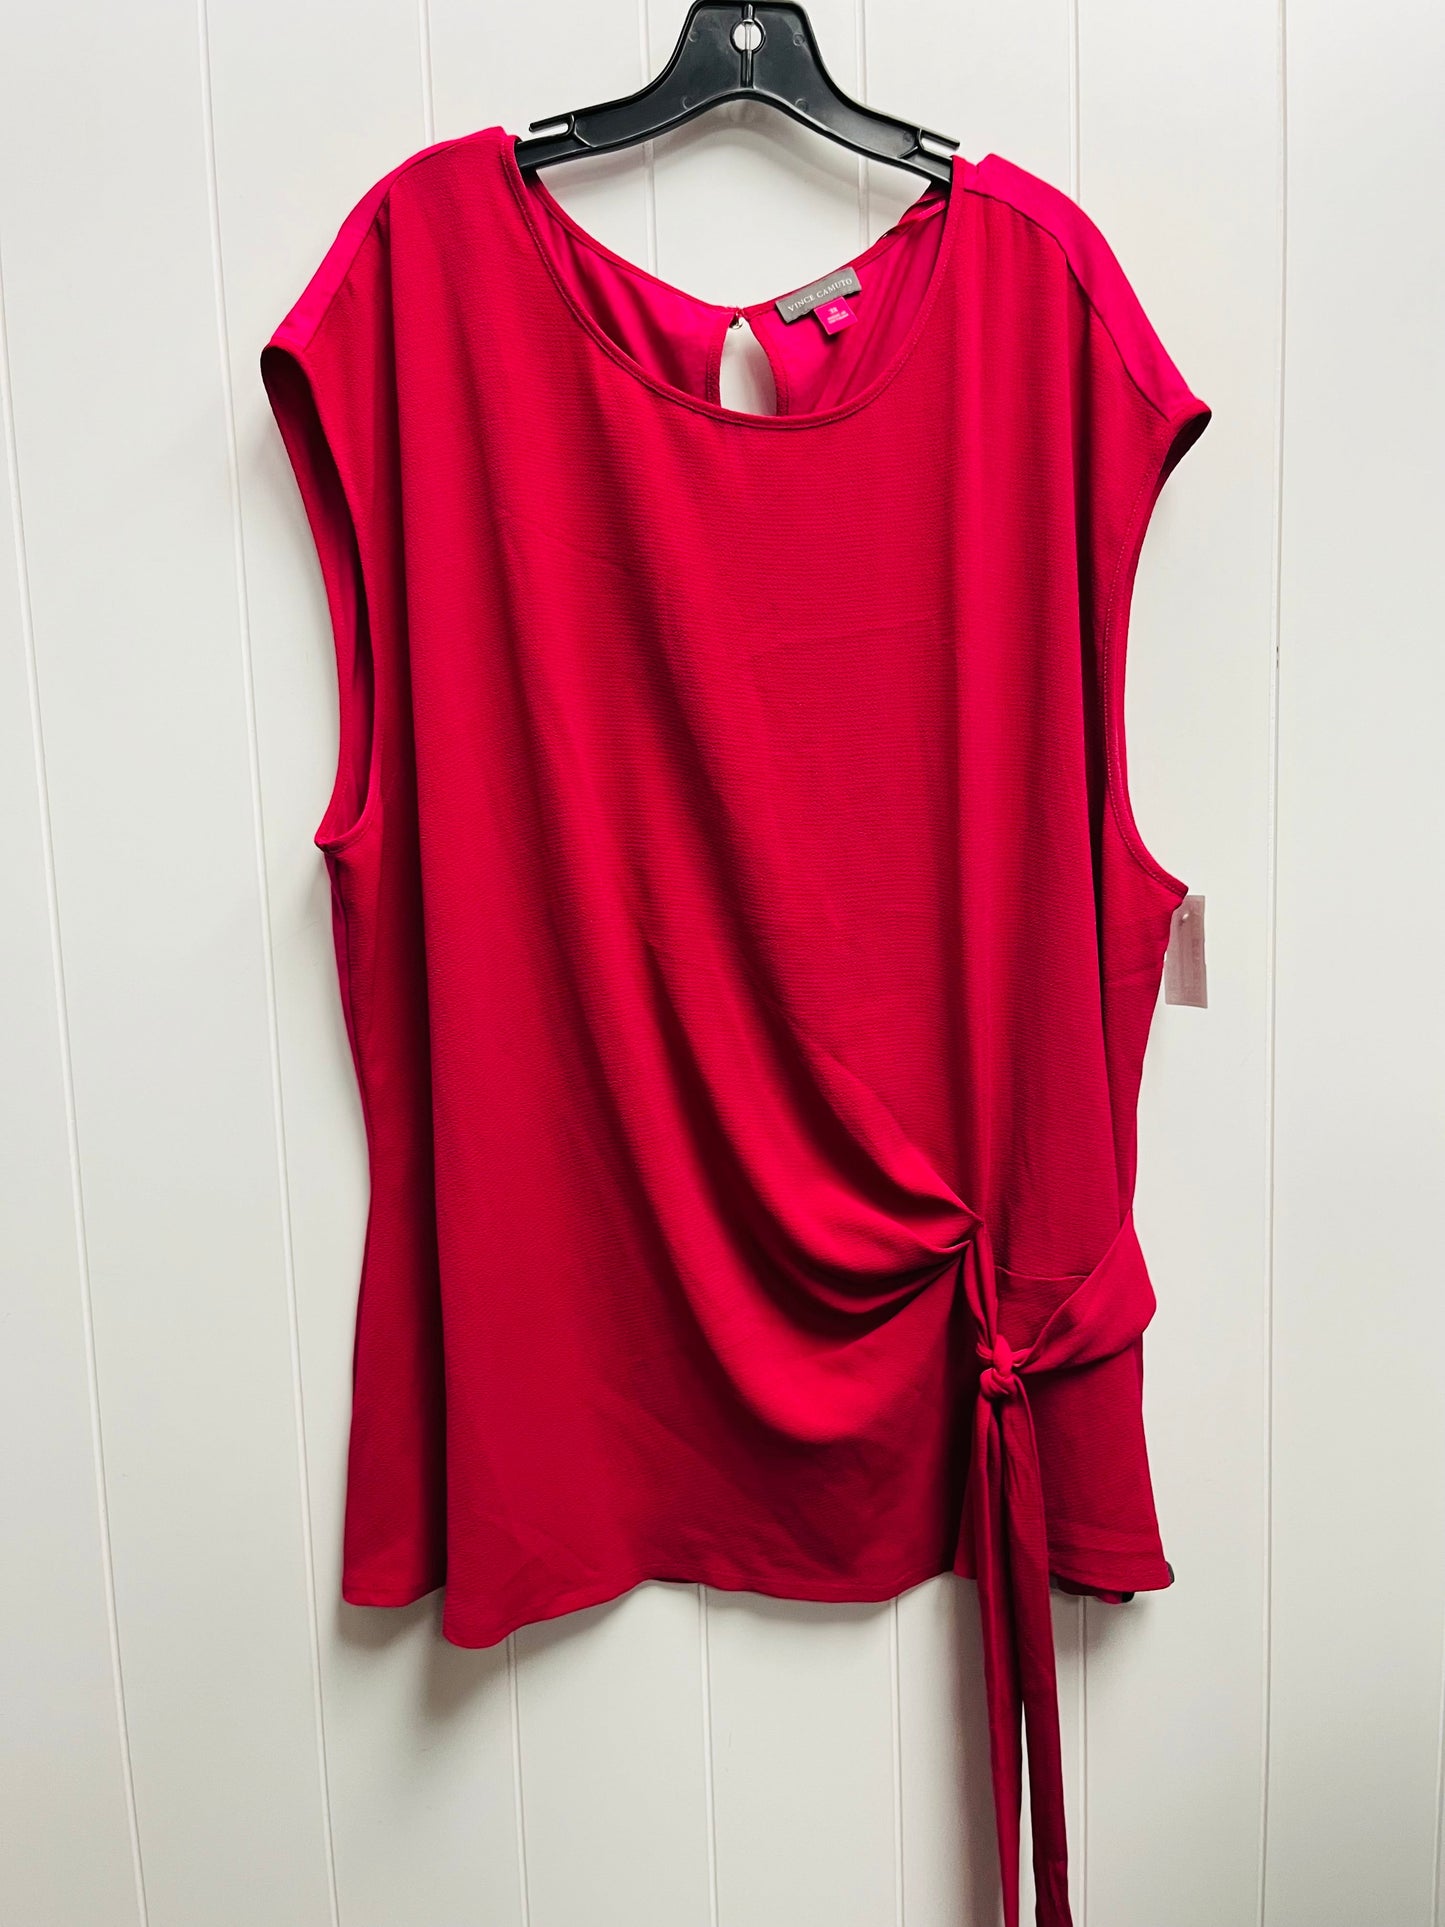 Red Top Short Sleeve Vince Camuto, Size 3x